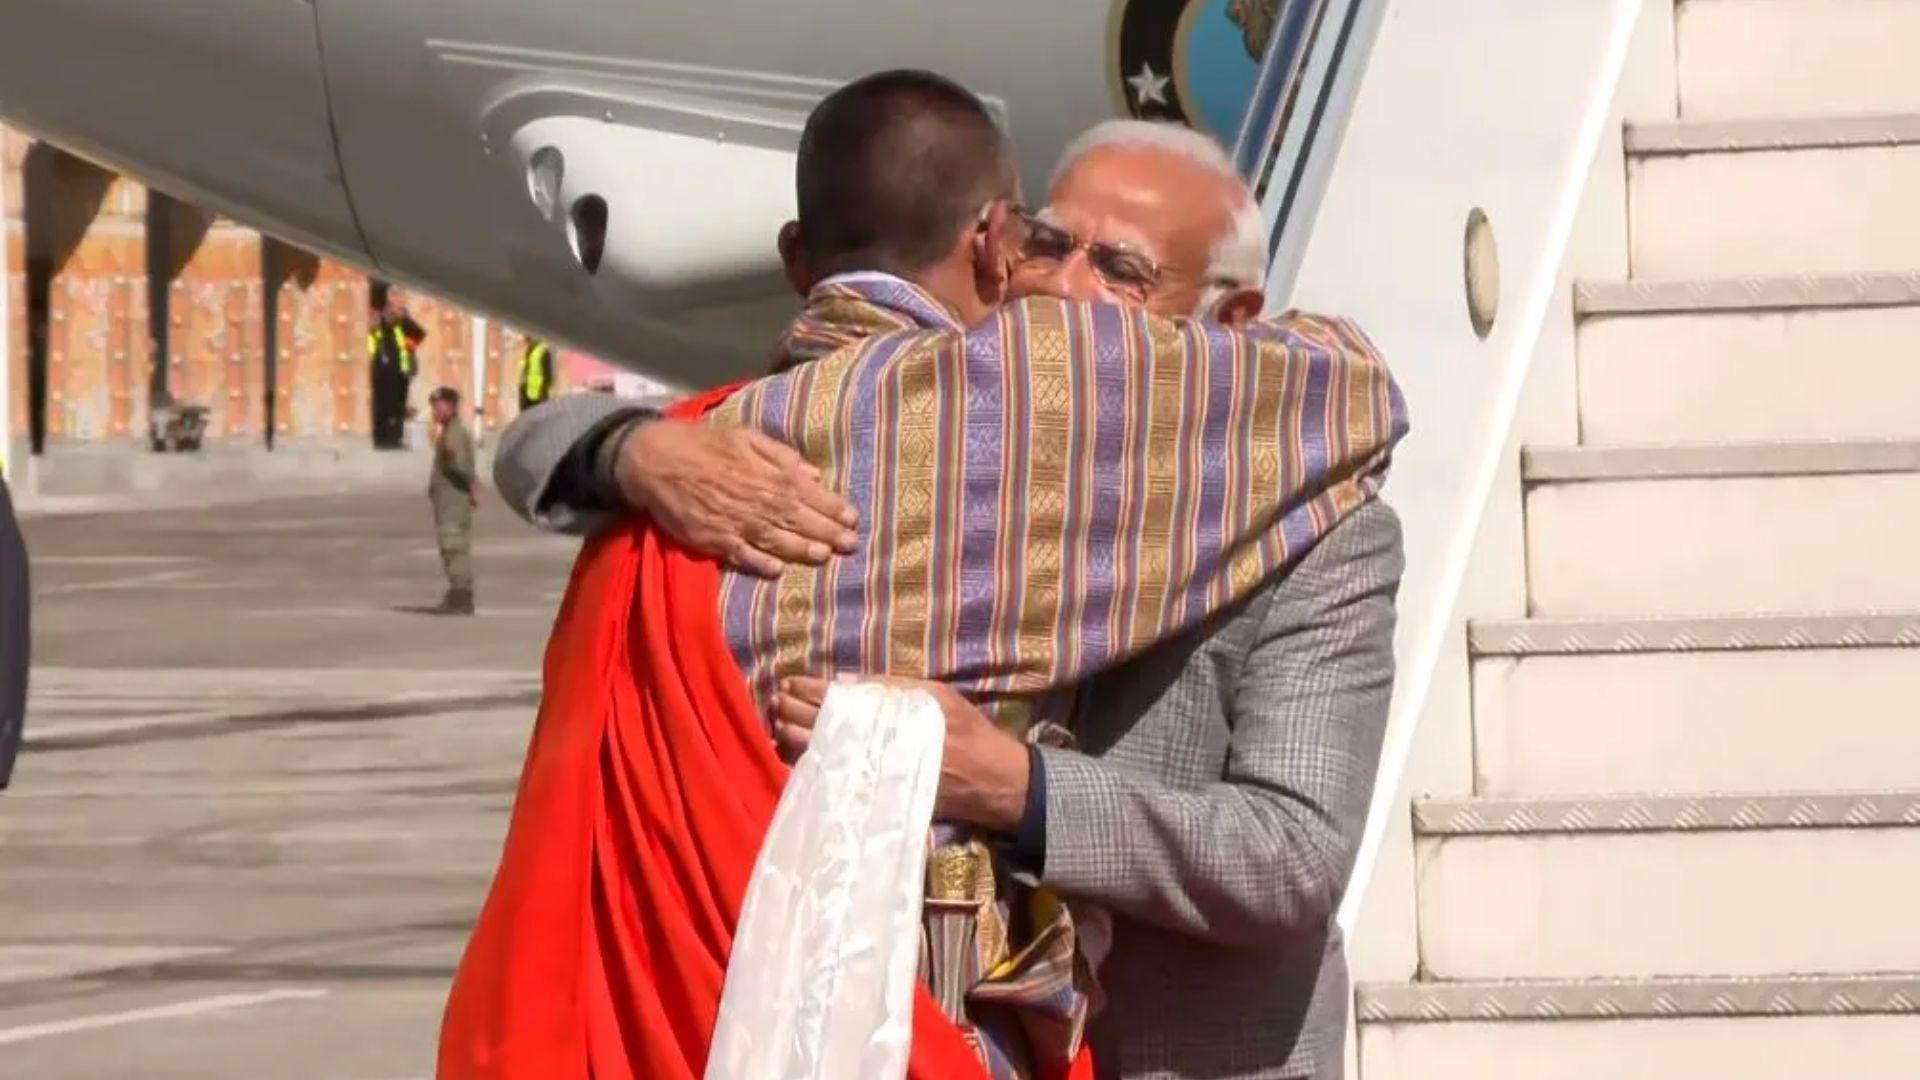 PM Modi arrives in Bhutan on two-day state visit